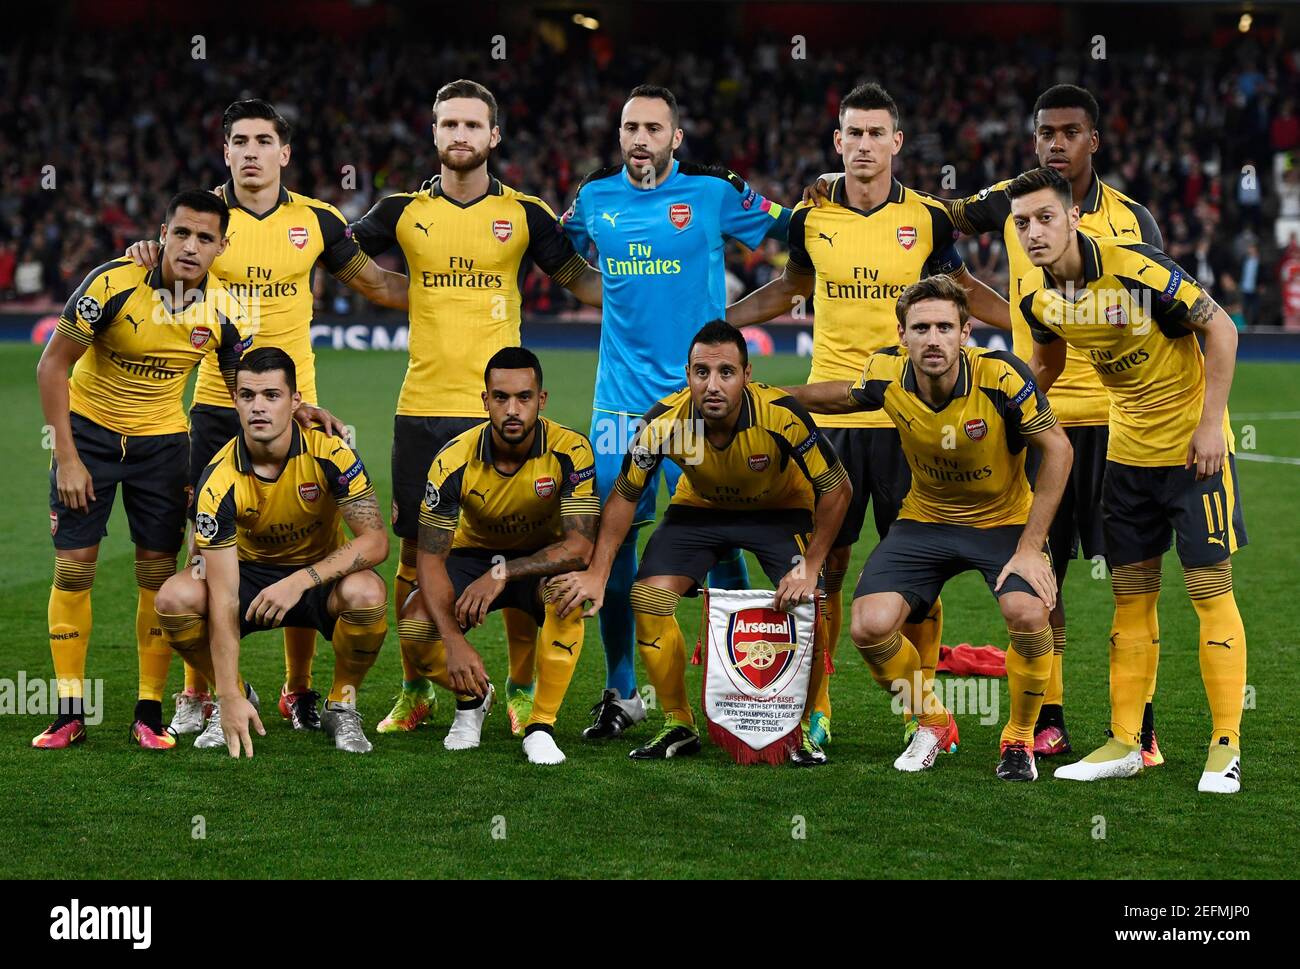 Arsenal team before the UEFA Champions League soccer match, Semi Final,  Second Leg, Arsenal vs Manchester United at the Emirates Stadium in London,  UK on May 5, 2009. Manchester United won 3-1.